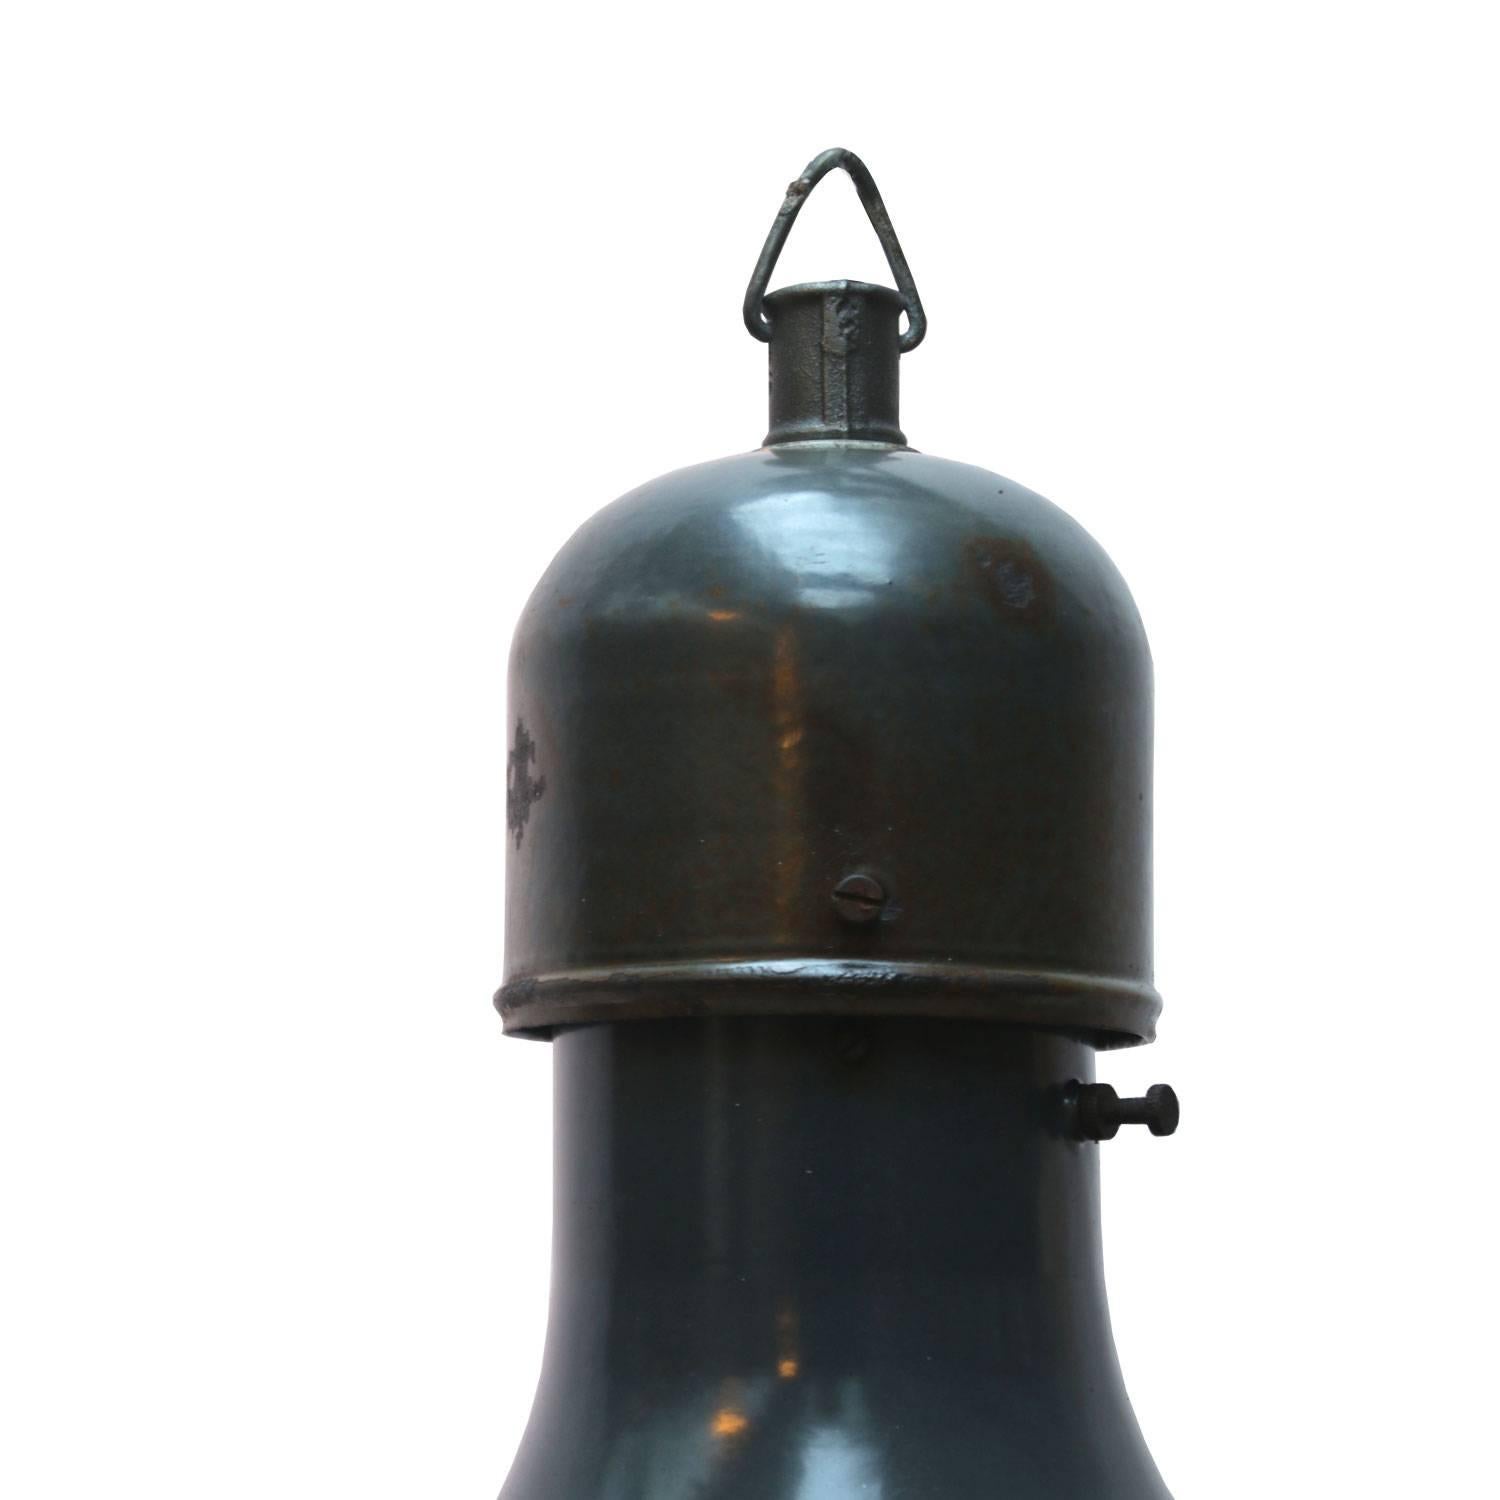 Blue large factory light blue enamel. White interior cast iron top.

Weight: 2.8 kg / 6.2 lb

Priced per individual item. All lamps have been made suitable by international standards for incandescent light bulbs, energy-efficient and LED bulbs.